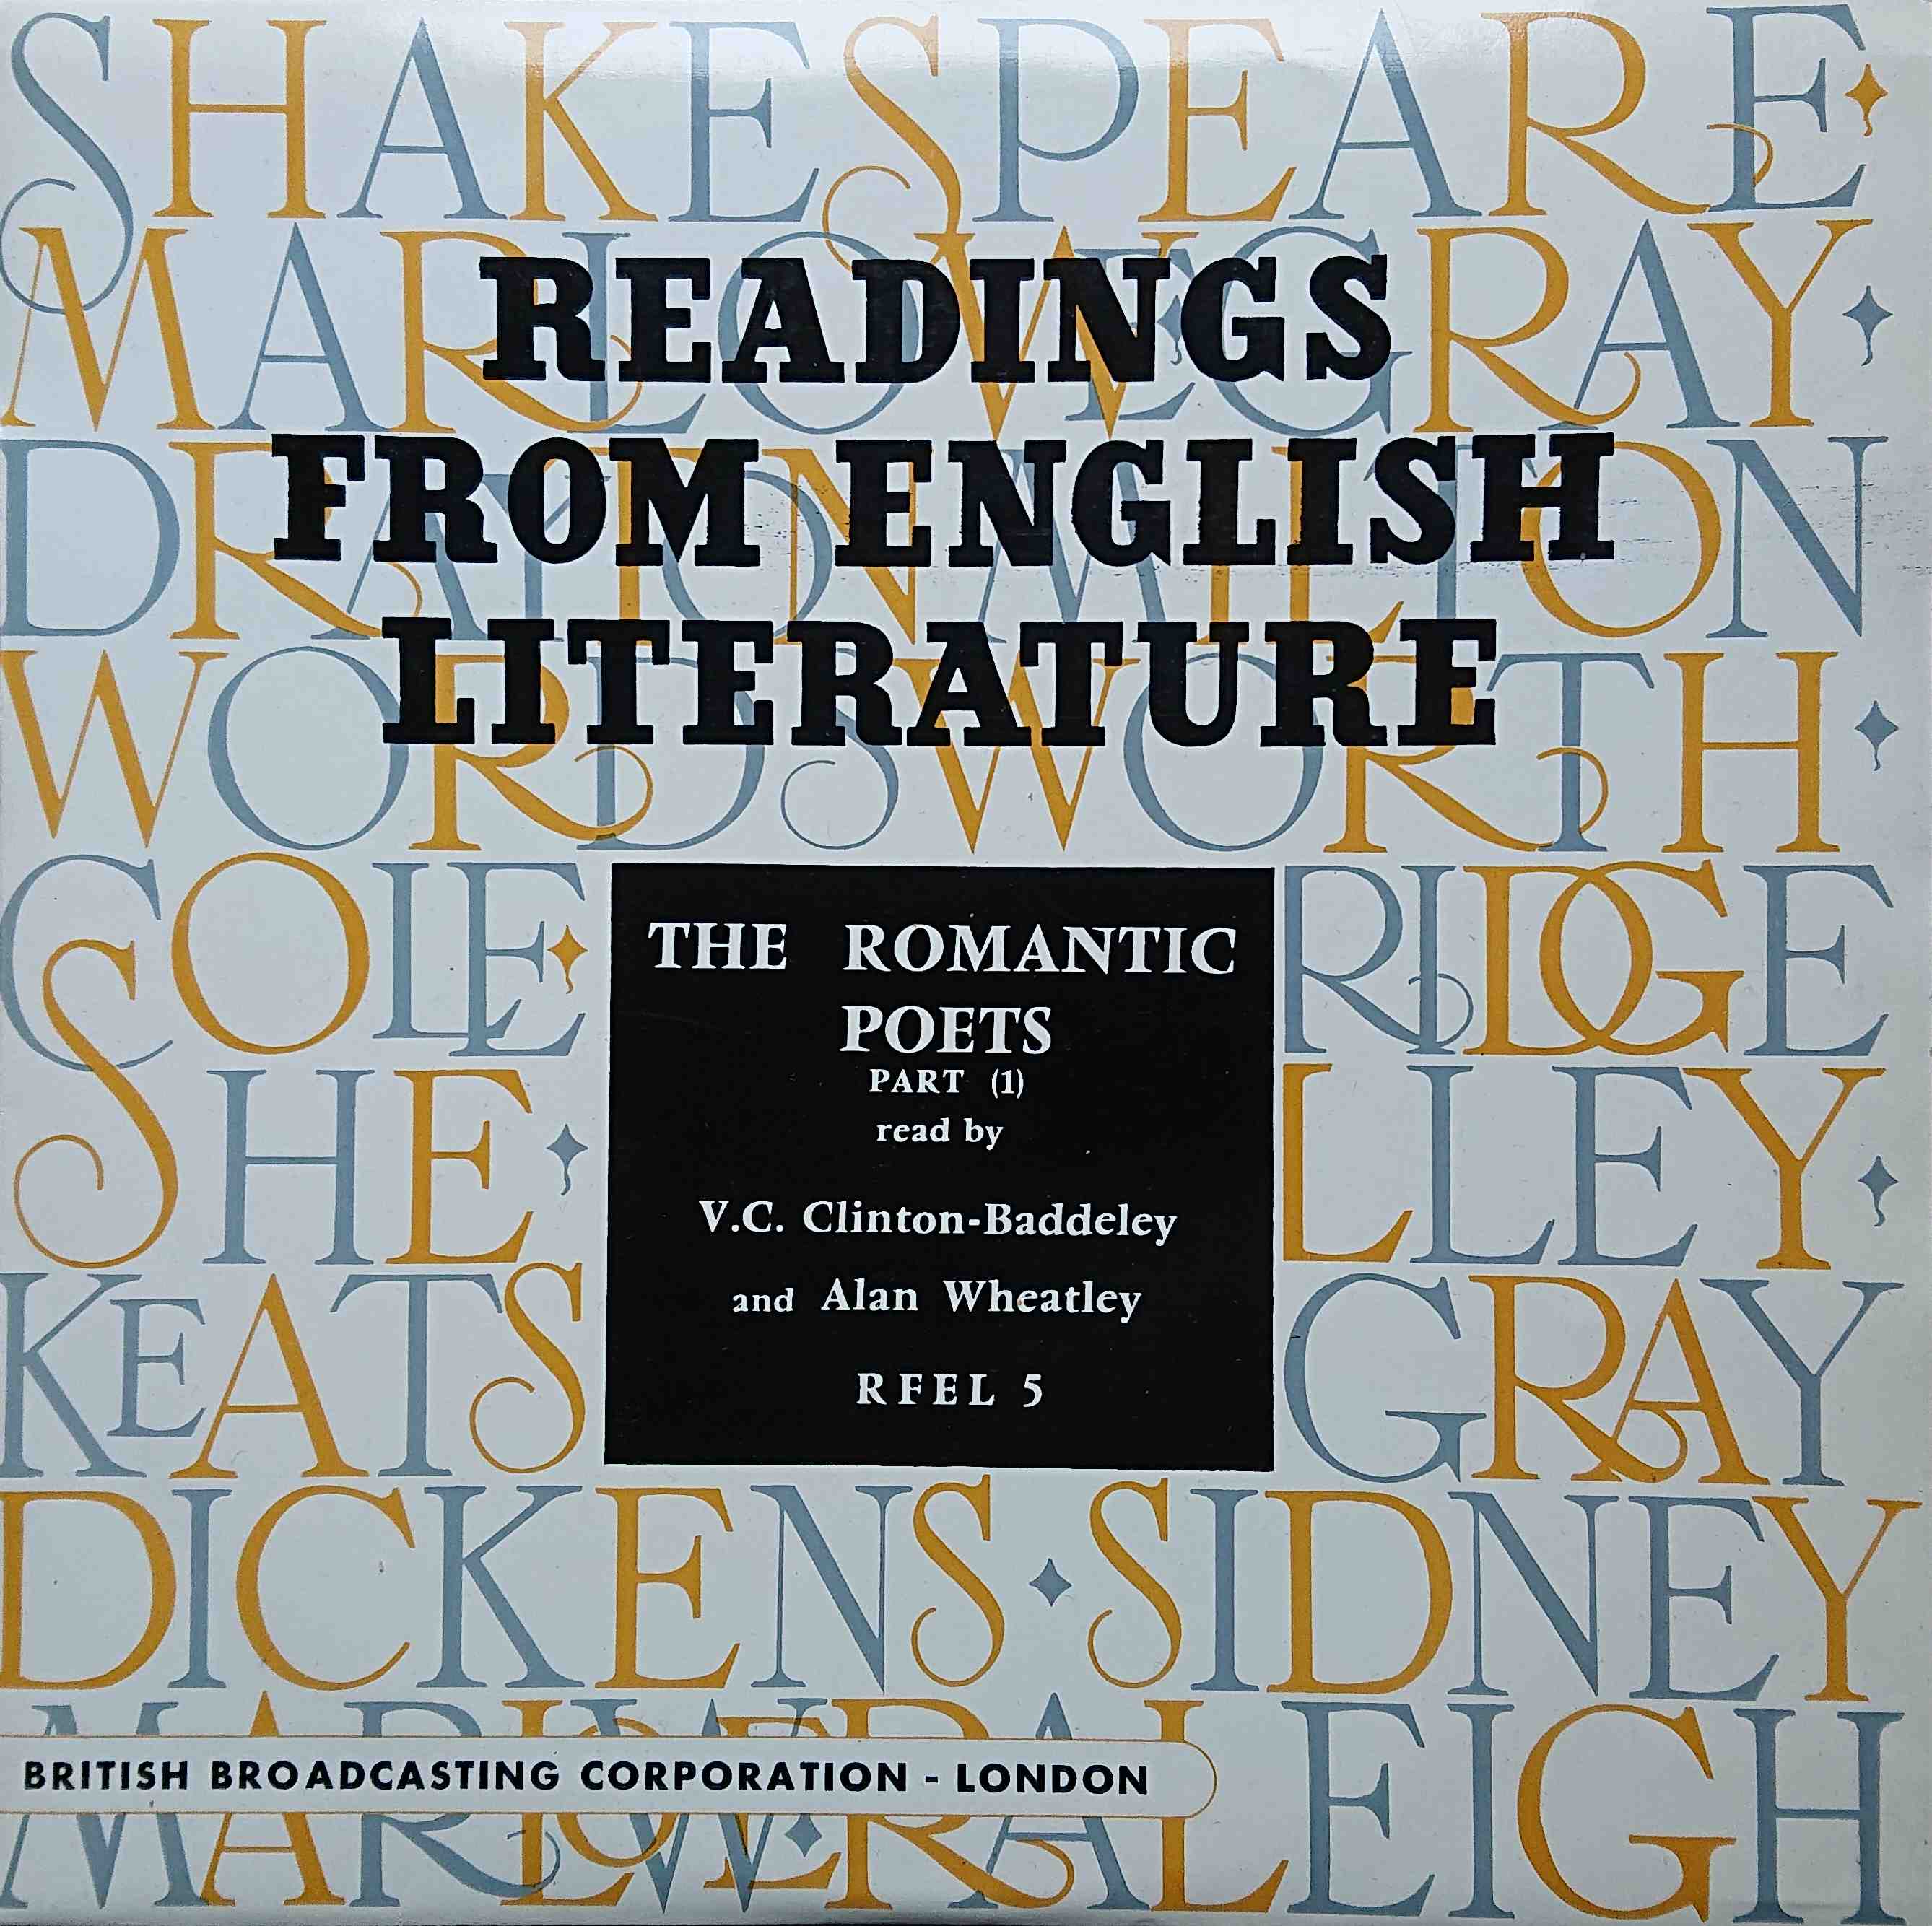 Picture of RFEL 5 The Romantic Poets Part (1) by artist V. C. Clinton-Baddeley / Alan Wheatley from the BBC 10inches - Records and Tapes library